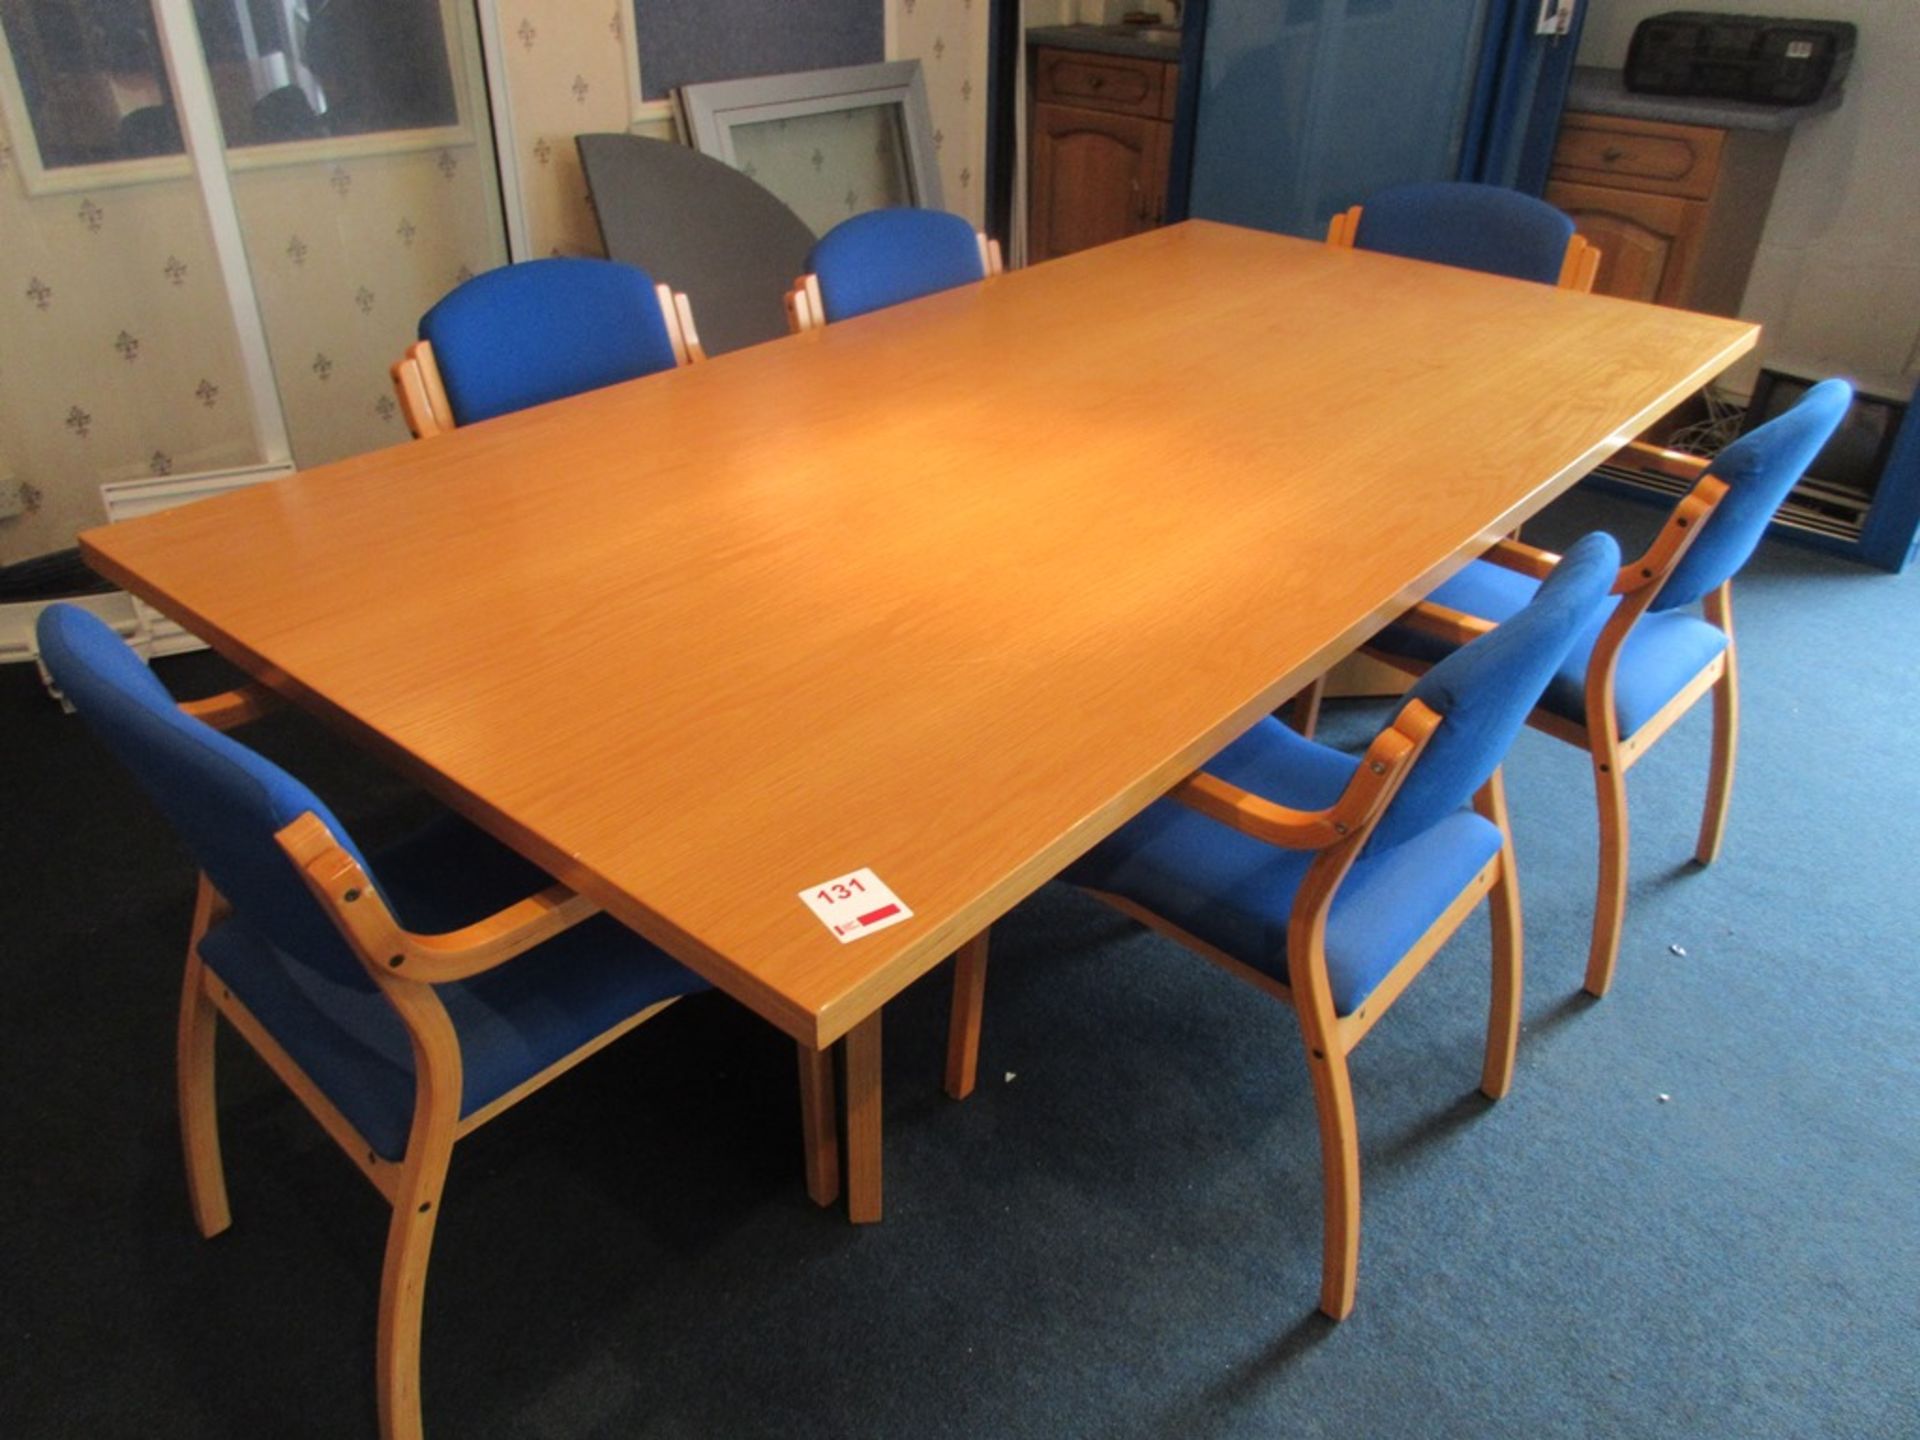 Wood effect boardroom table, approx. 8' x 4' with 6 x wood effect framed upholstered meeting chairs